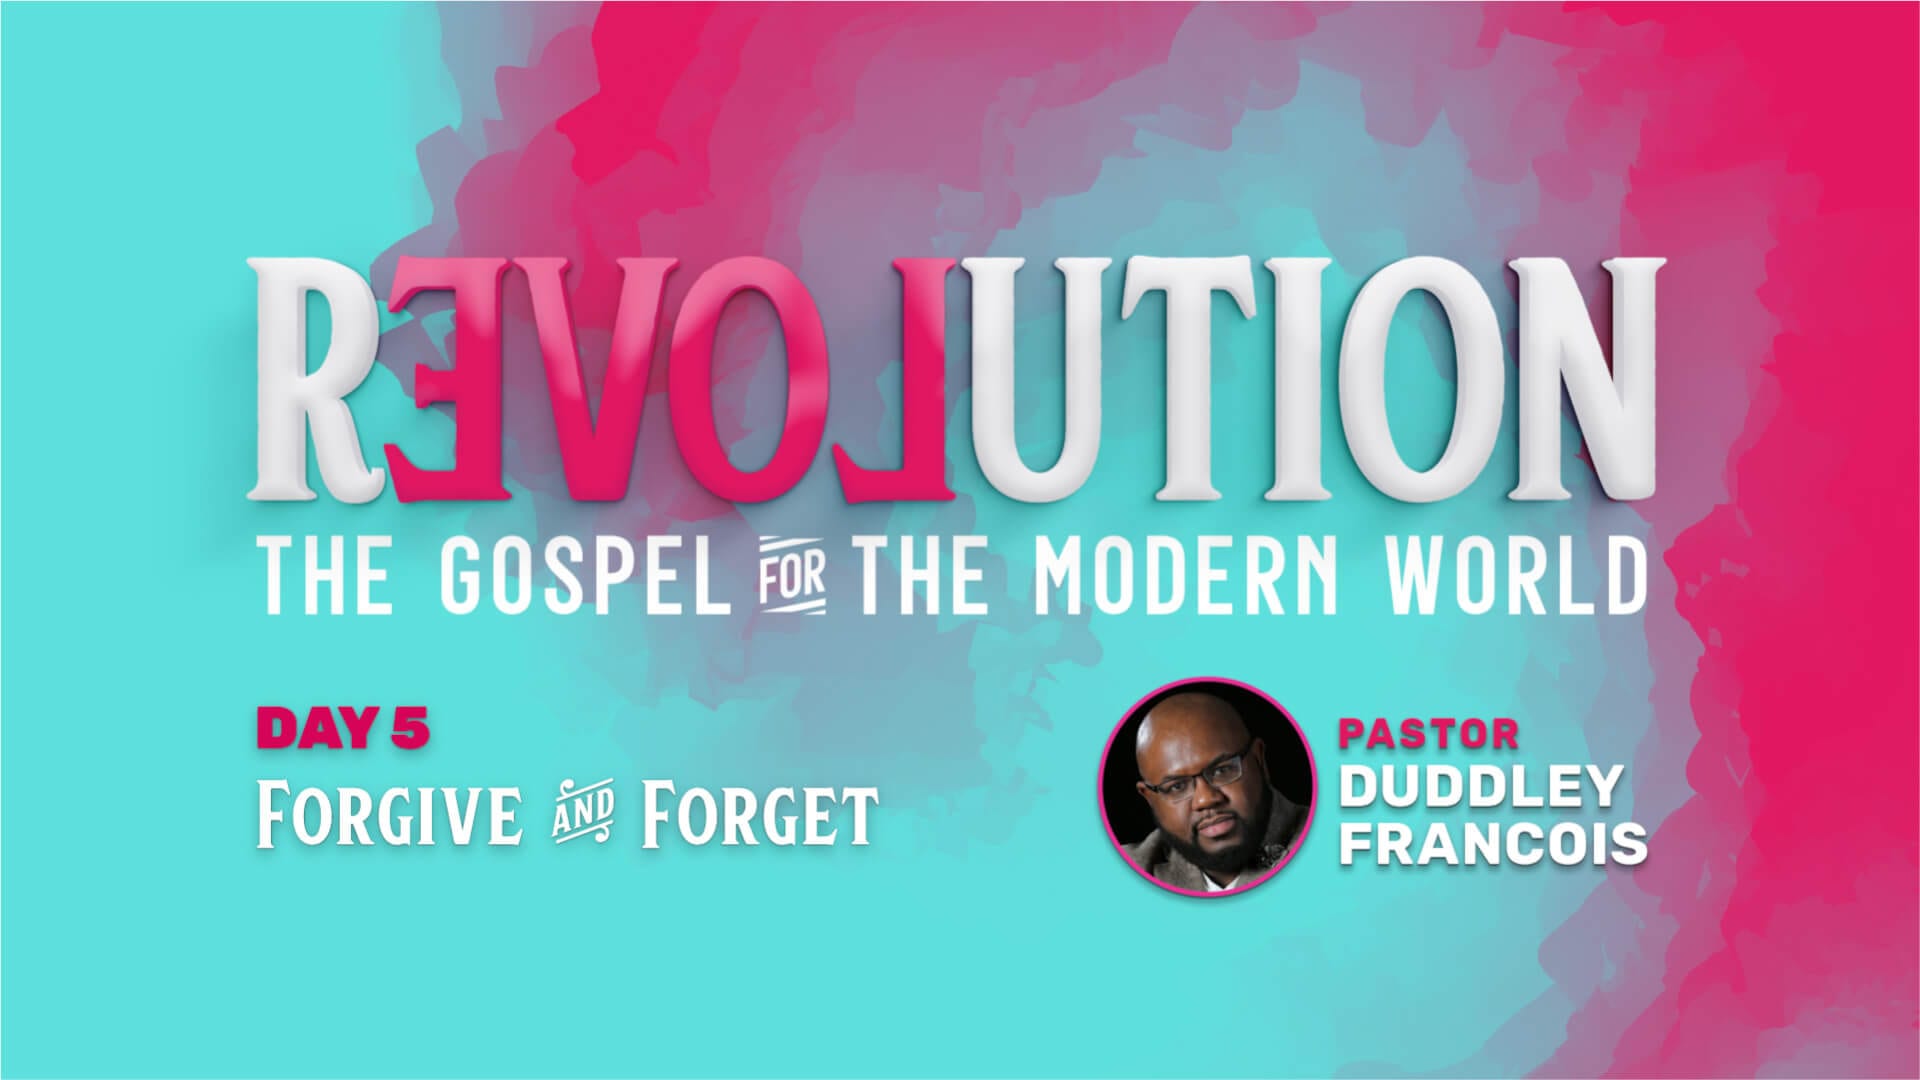 rEVOLution - DAY 5 - Forgive And Forget - Duddley Francois